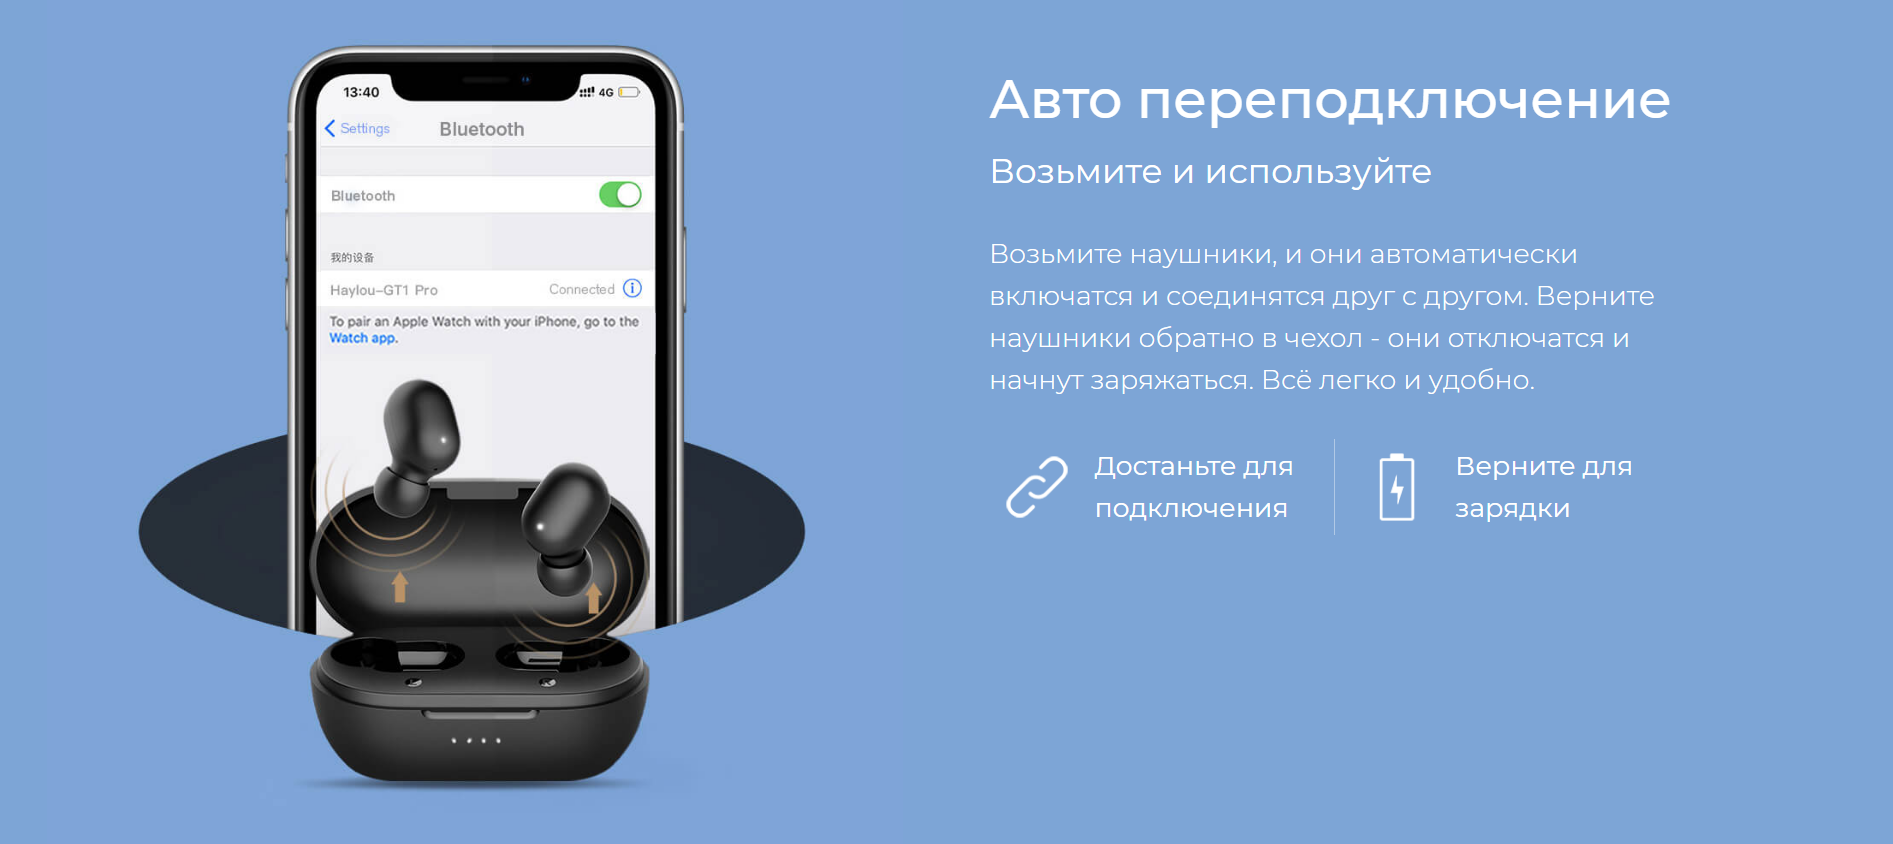 Haylou x1 pro. Гарнитура Haylou gt1. Xiaomi Haylou gt1 Pro. True Wireless Haylou gt1 Pro. Наушники Haylou gt1 Pro.